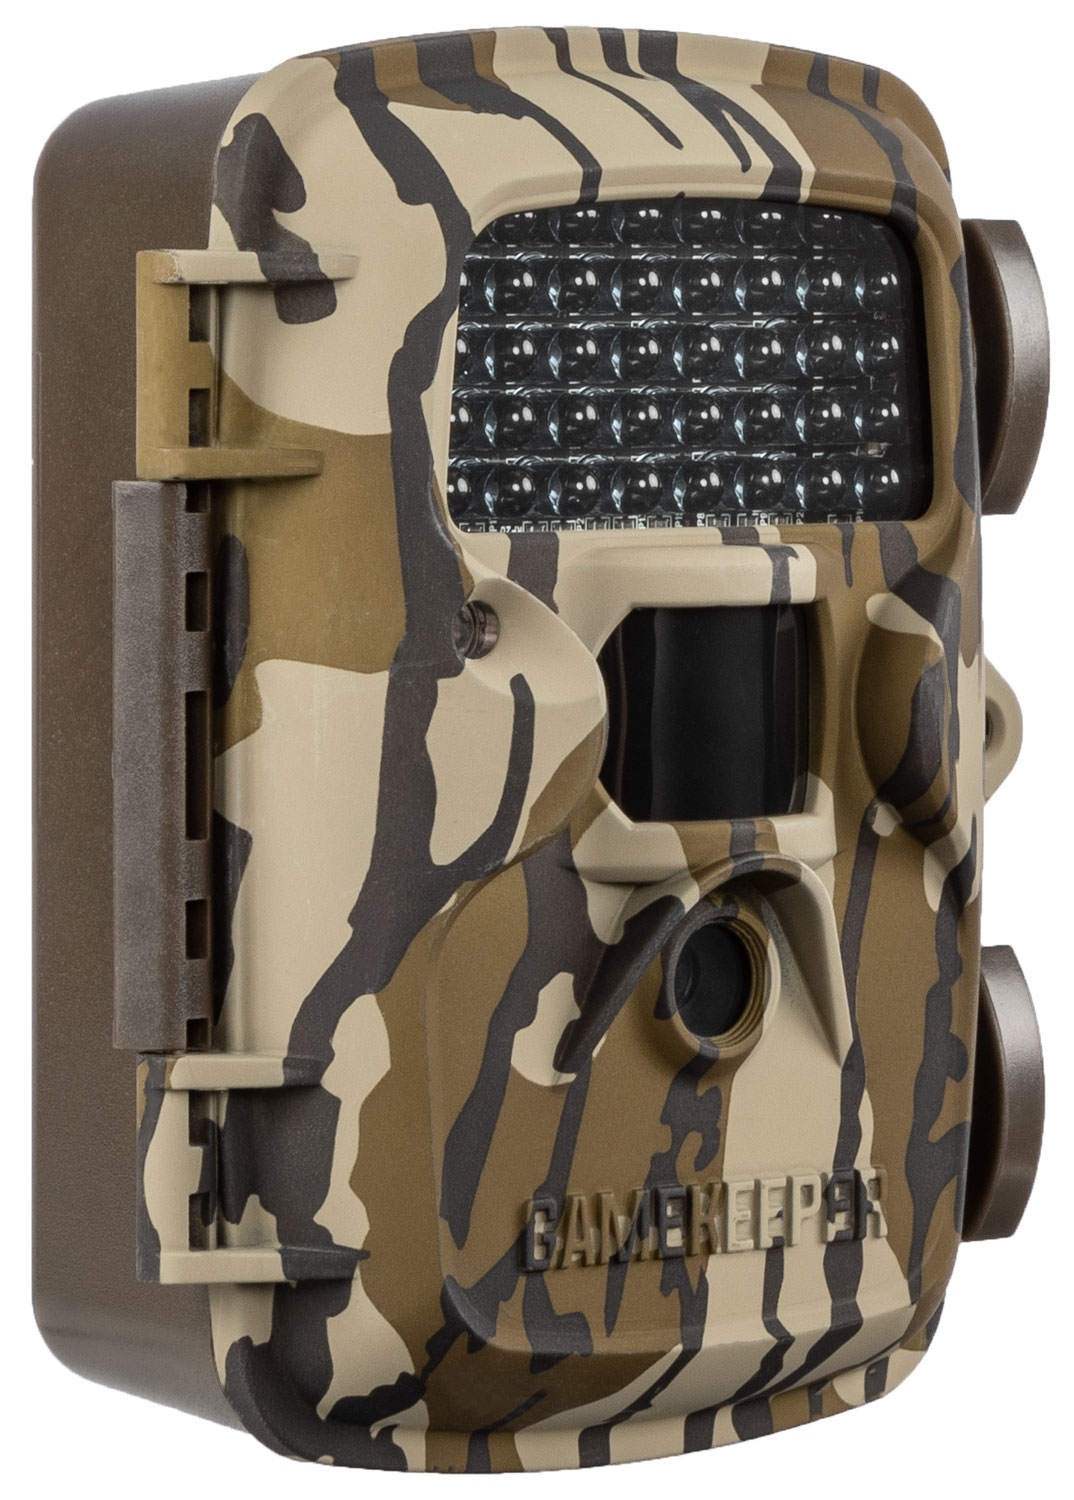 Covert Scouting Cameras Shadow 16 MP No Glow 100 ft Mossy Oak BottomLand